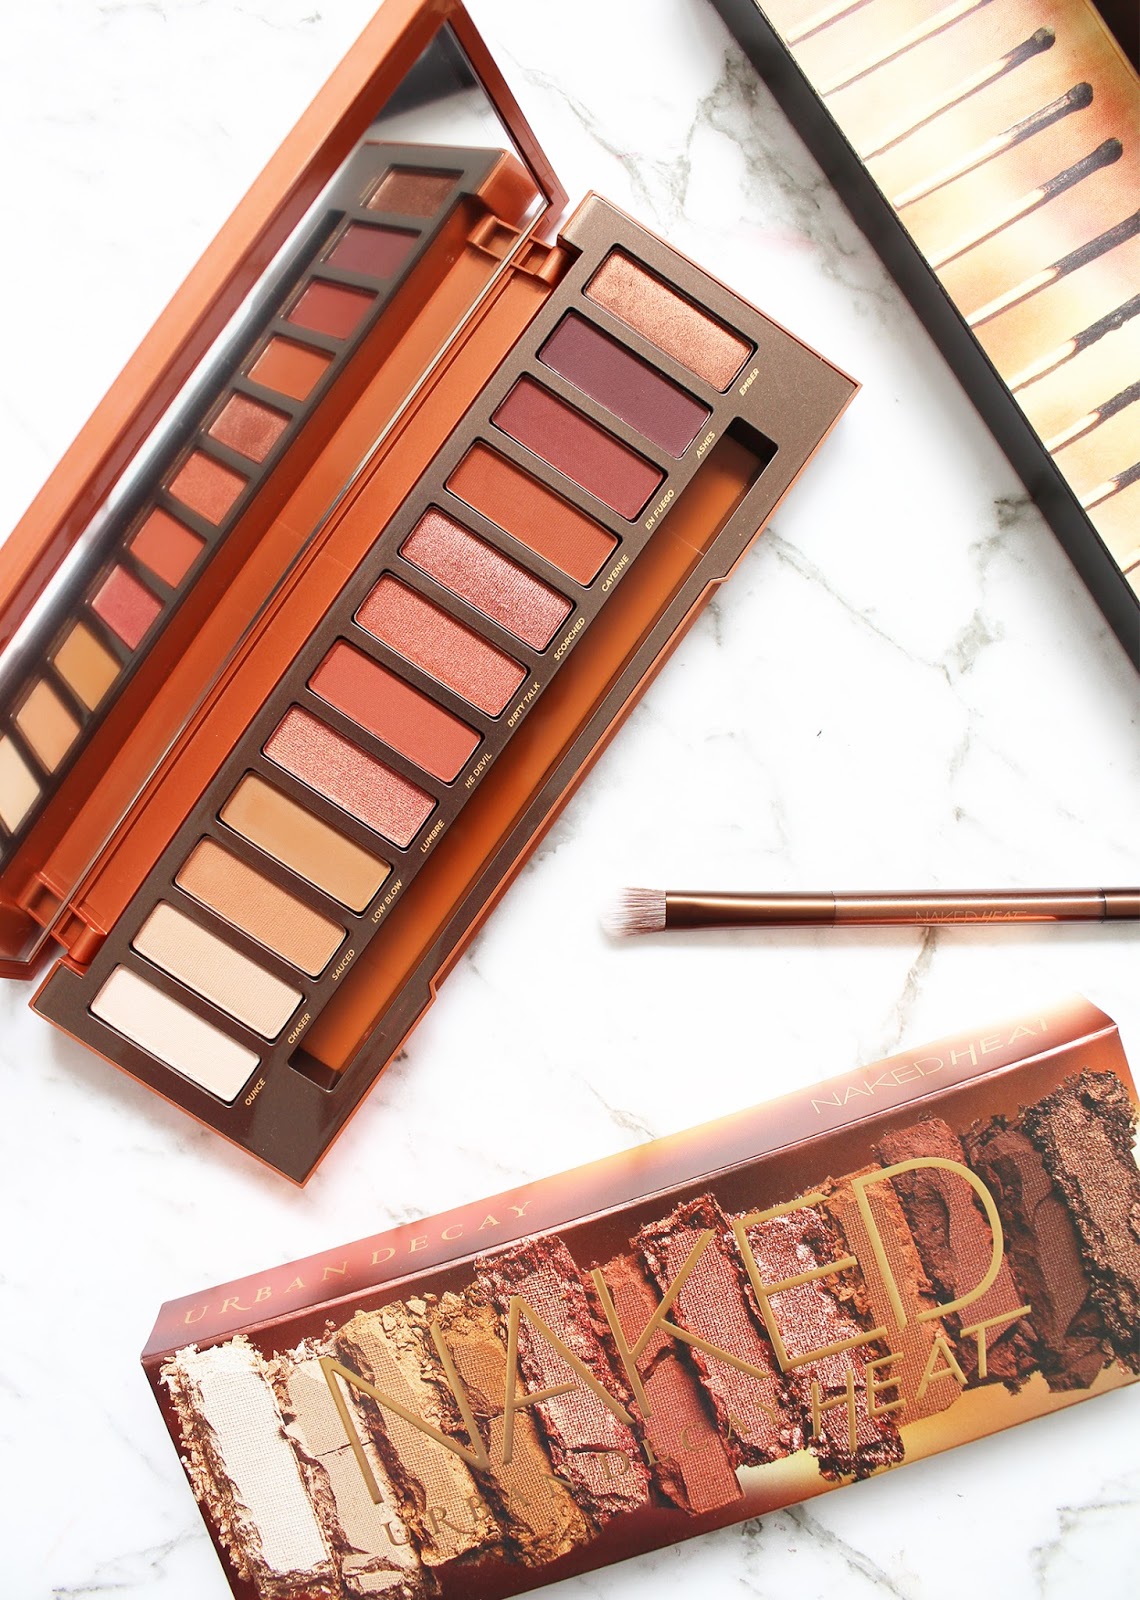 Urban-Decay-Naked-Heat-Palette-Review-Swatches - Beauty 